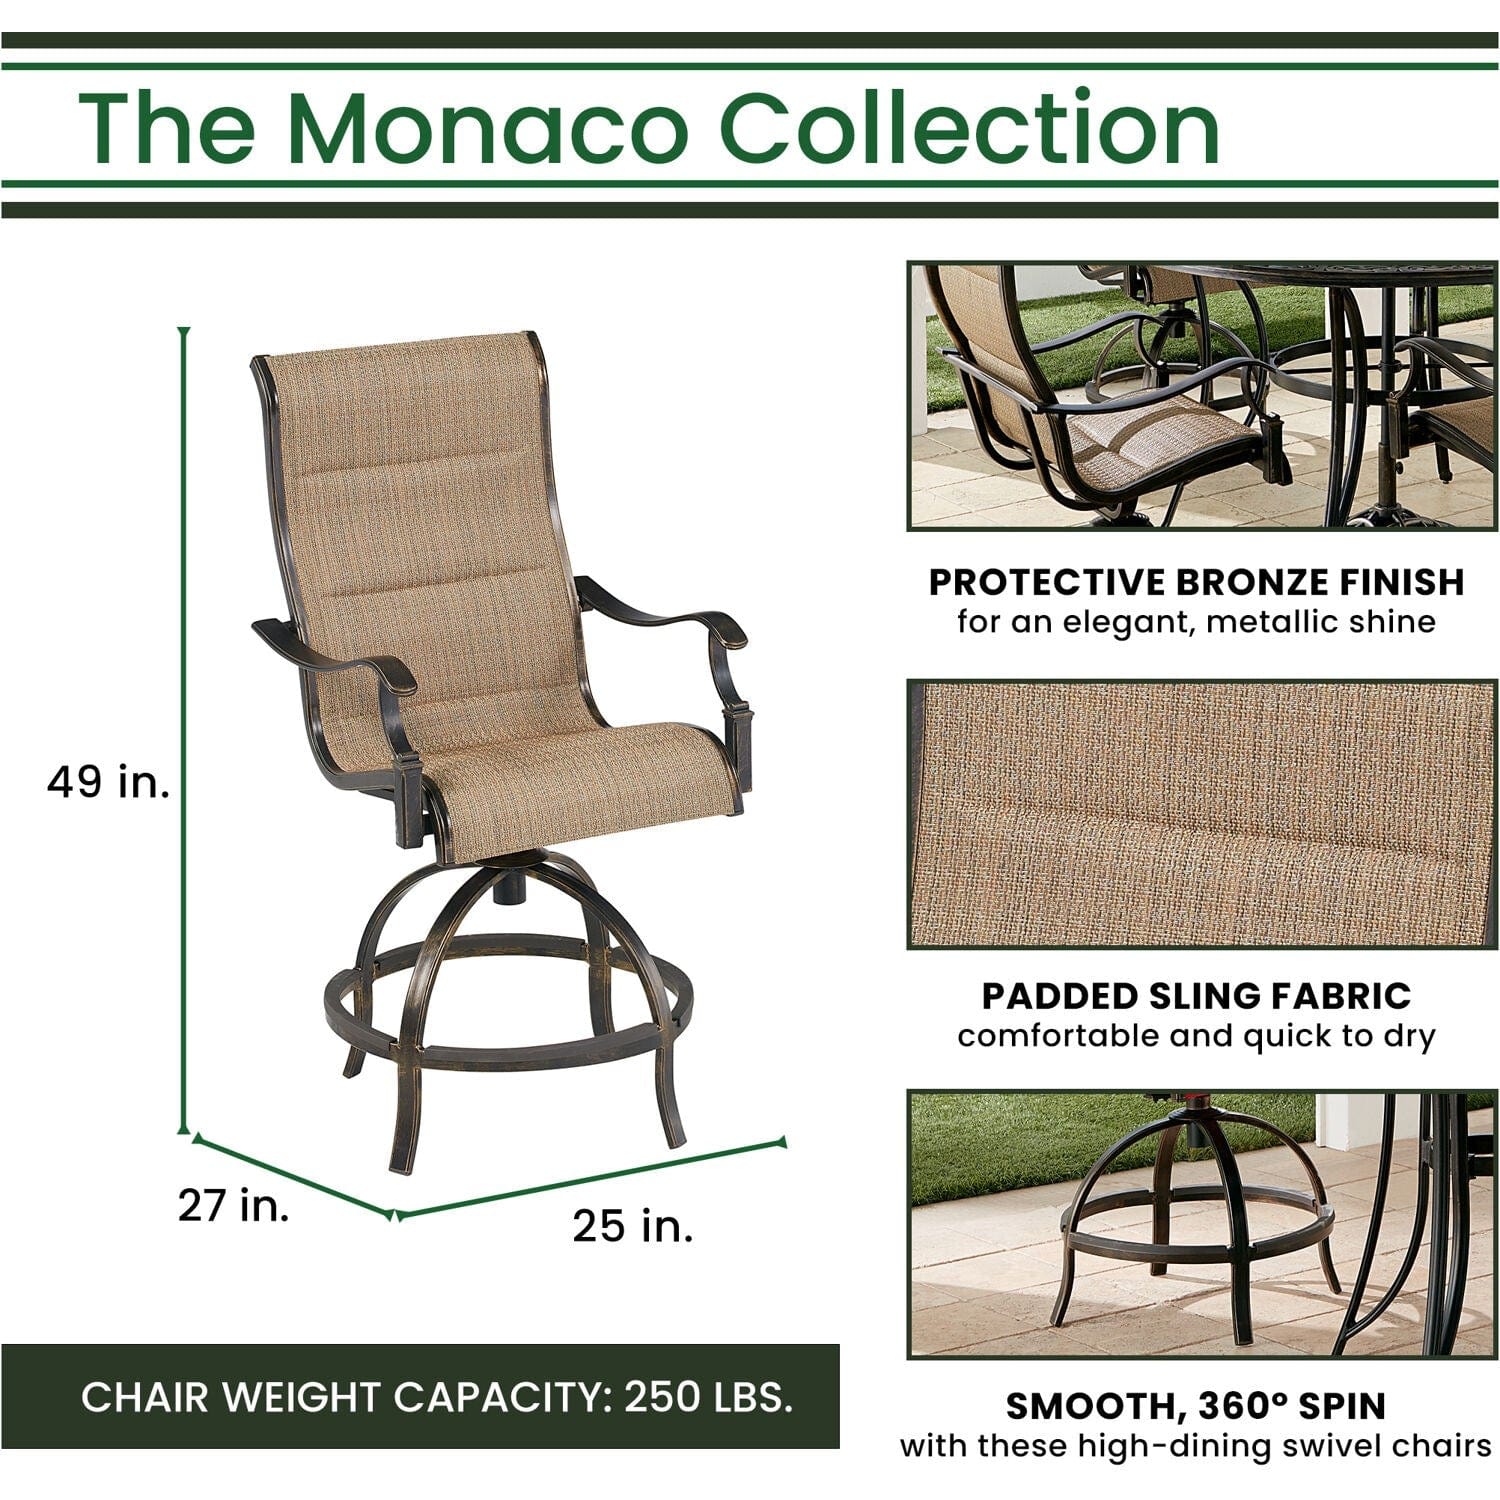 Hanover Outdoor Dining Set Hanover Monaco 5-Piece High-Dining Set in Tan with 4 Padded Counter-Height Swivel Chairs and a 56-In. Tile-Top Table | MONDN5PCPDBR-C-TAN